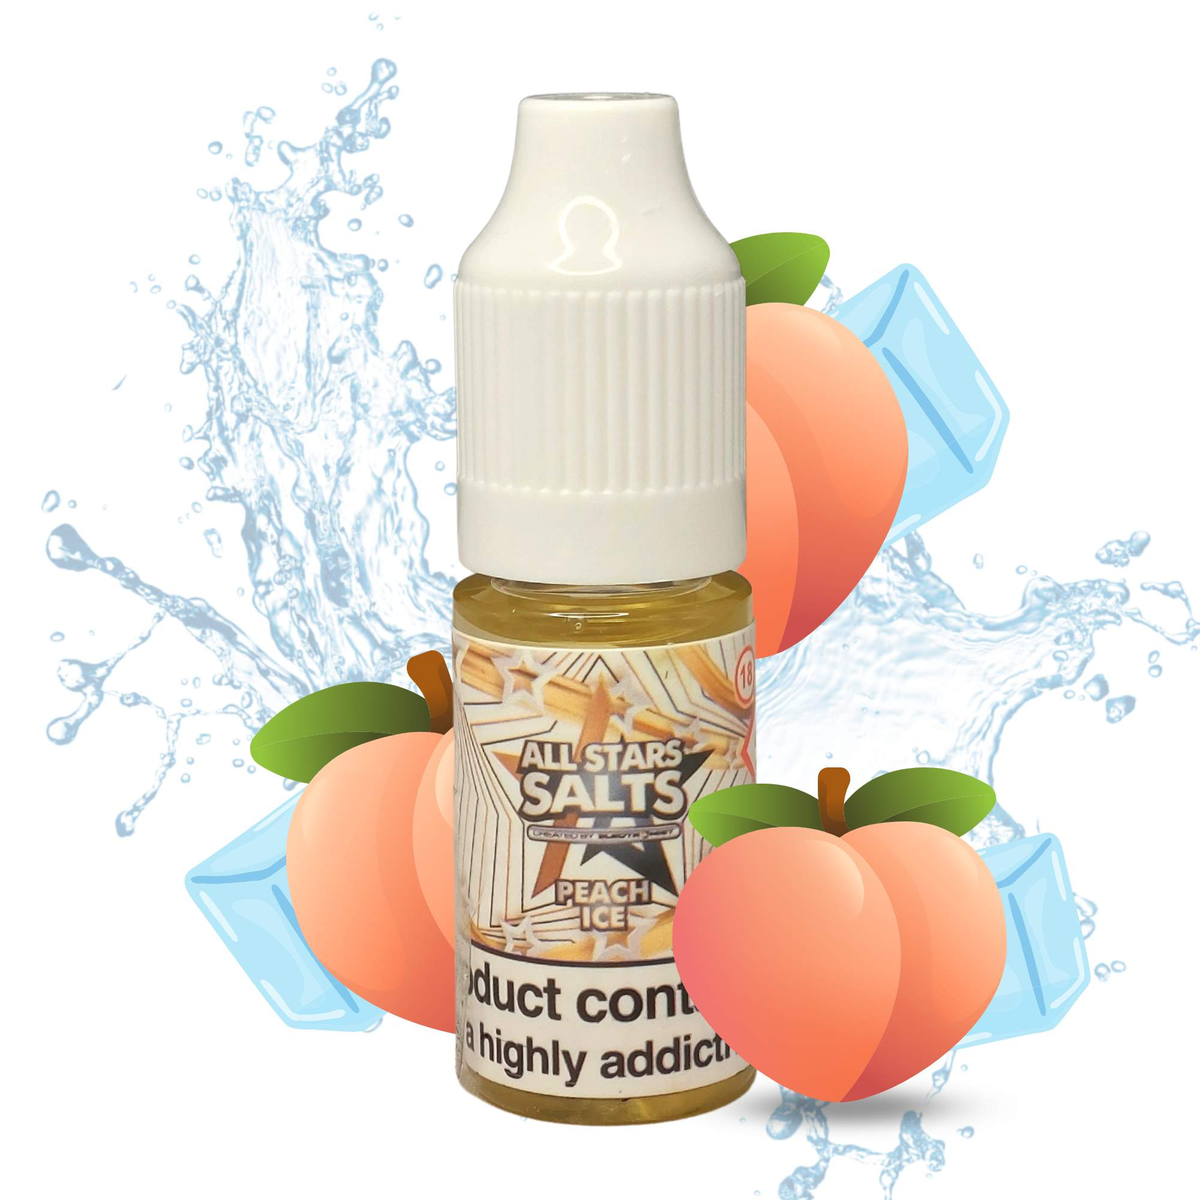 All Stars Salts from the vape brand you can trust, Electromist, . Get your taste buds ready for a flavour sensation, Peach Ice. Nicotine Content: 6mg/12mg/18mg Products may contain nicotine. For over 18s Only ejuice, vape pen, eliquid, e cigarette, 10ml, vaping, cloud, PG, VG, 60/40, vape liquid, Flavour, TPD